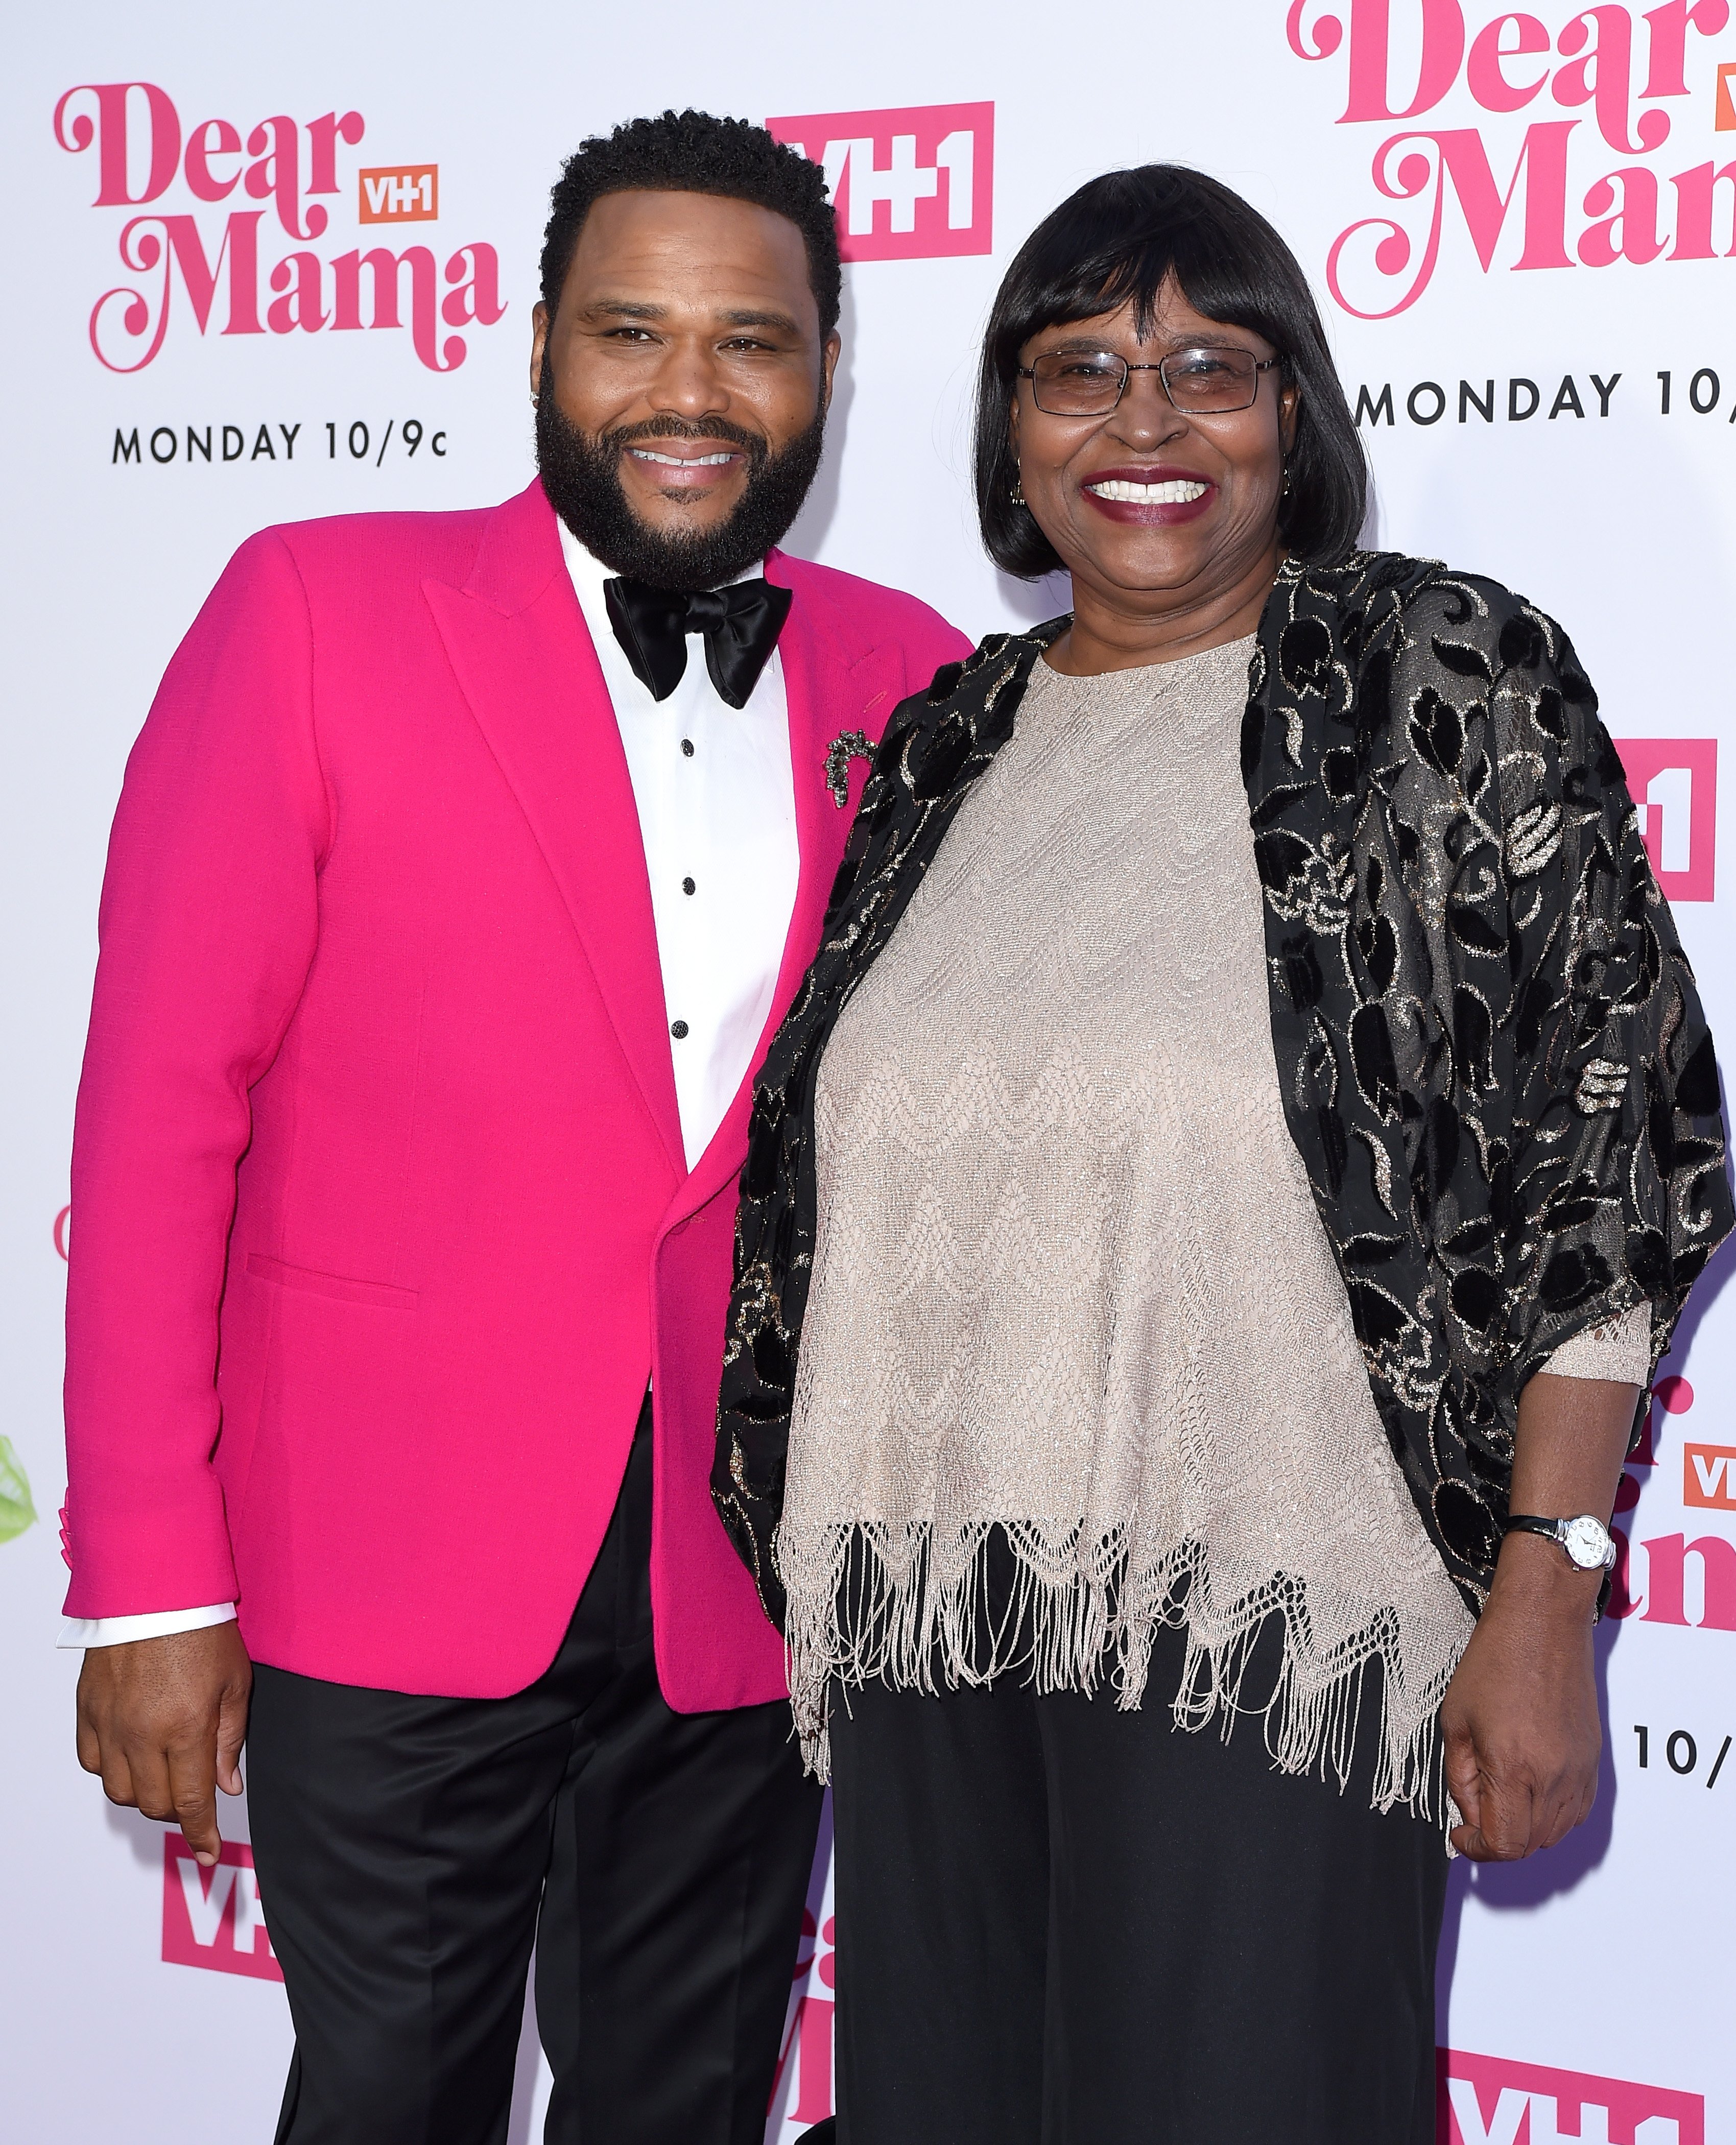 Anthony Anderson and Doris Hancox at Ace Hotel on May 02, 2019, in Los Angeles, California. | Source: Getty Images